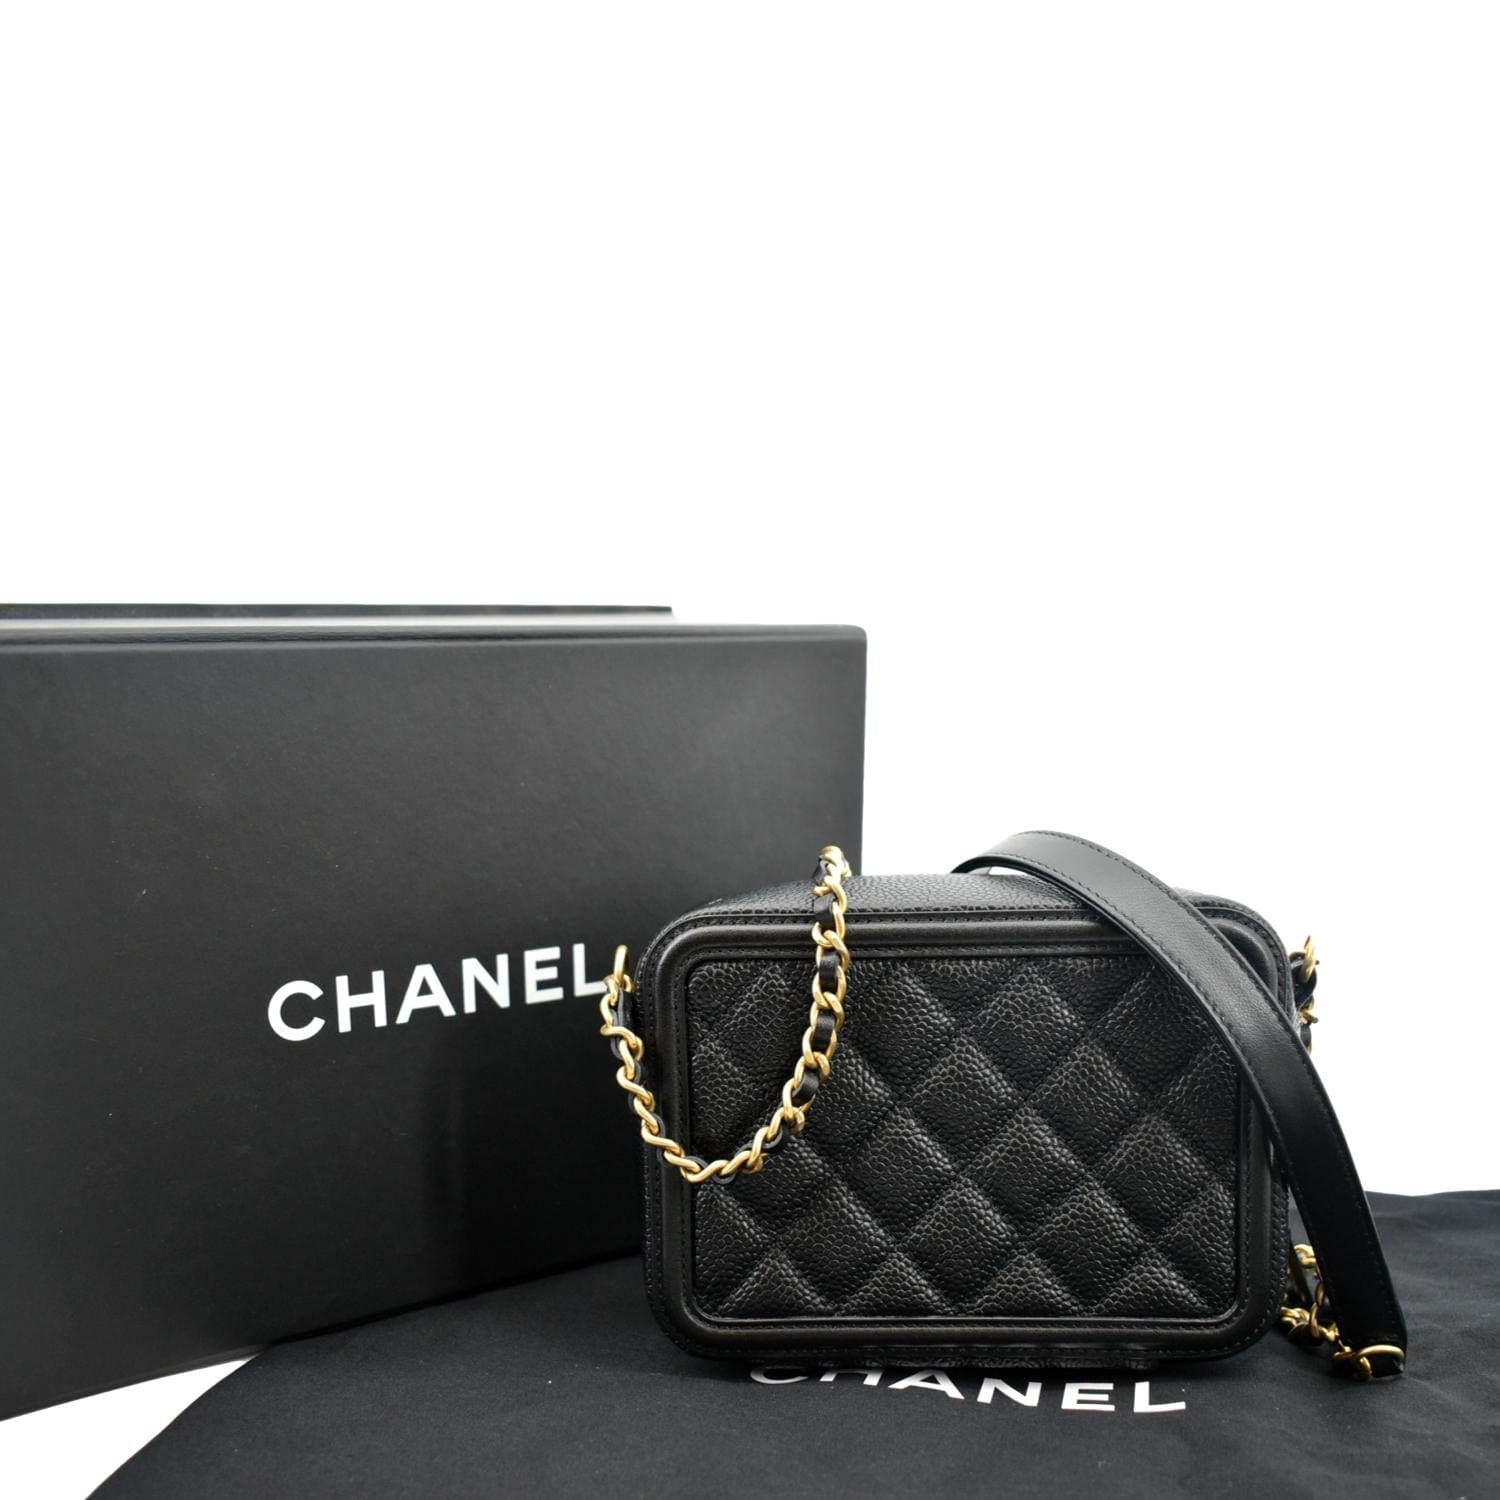 Chanel Quilted Black Caviar Leather Small CC Filigree Vanity Case Bag